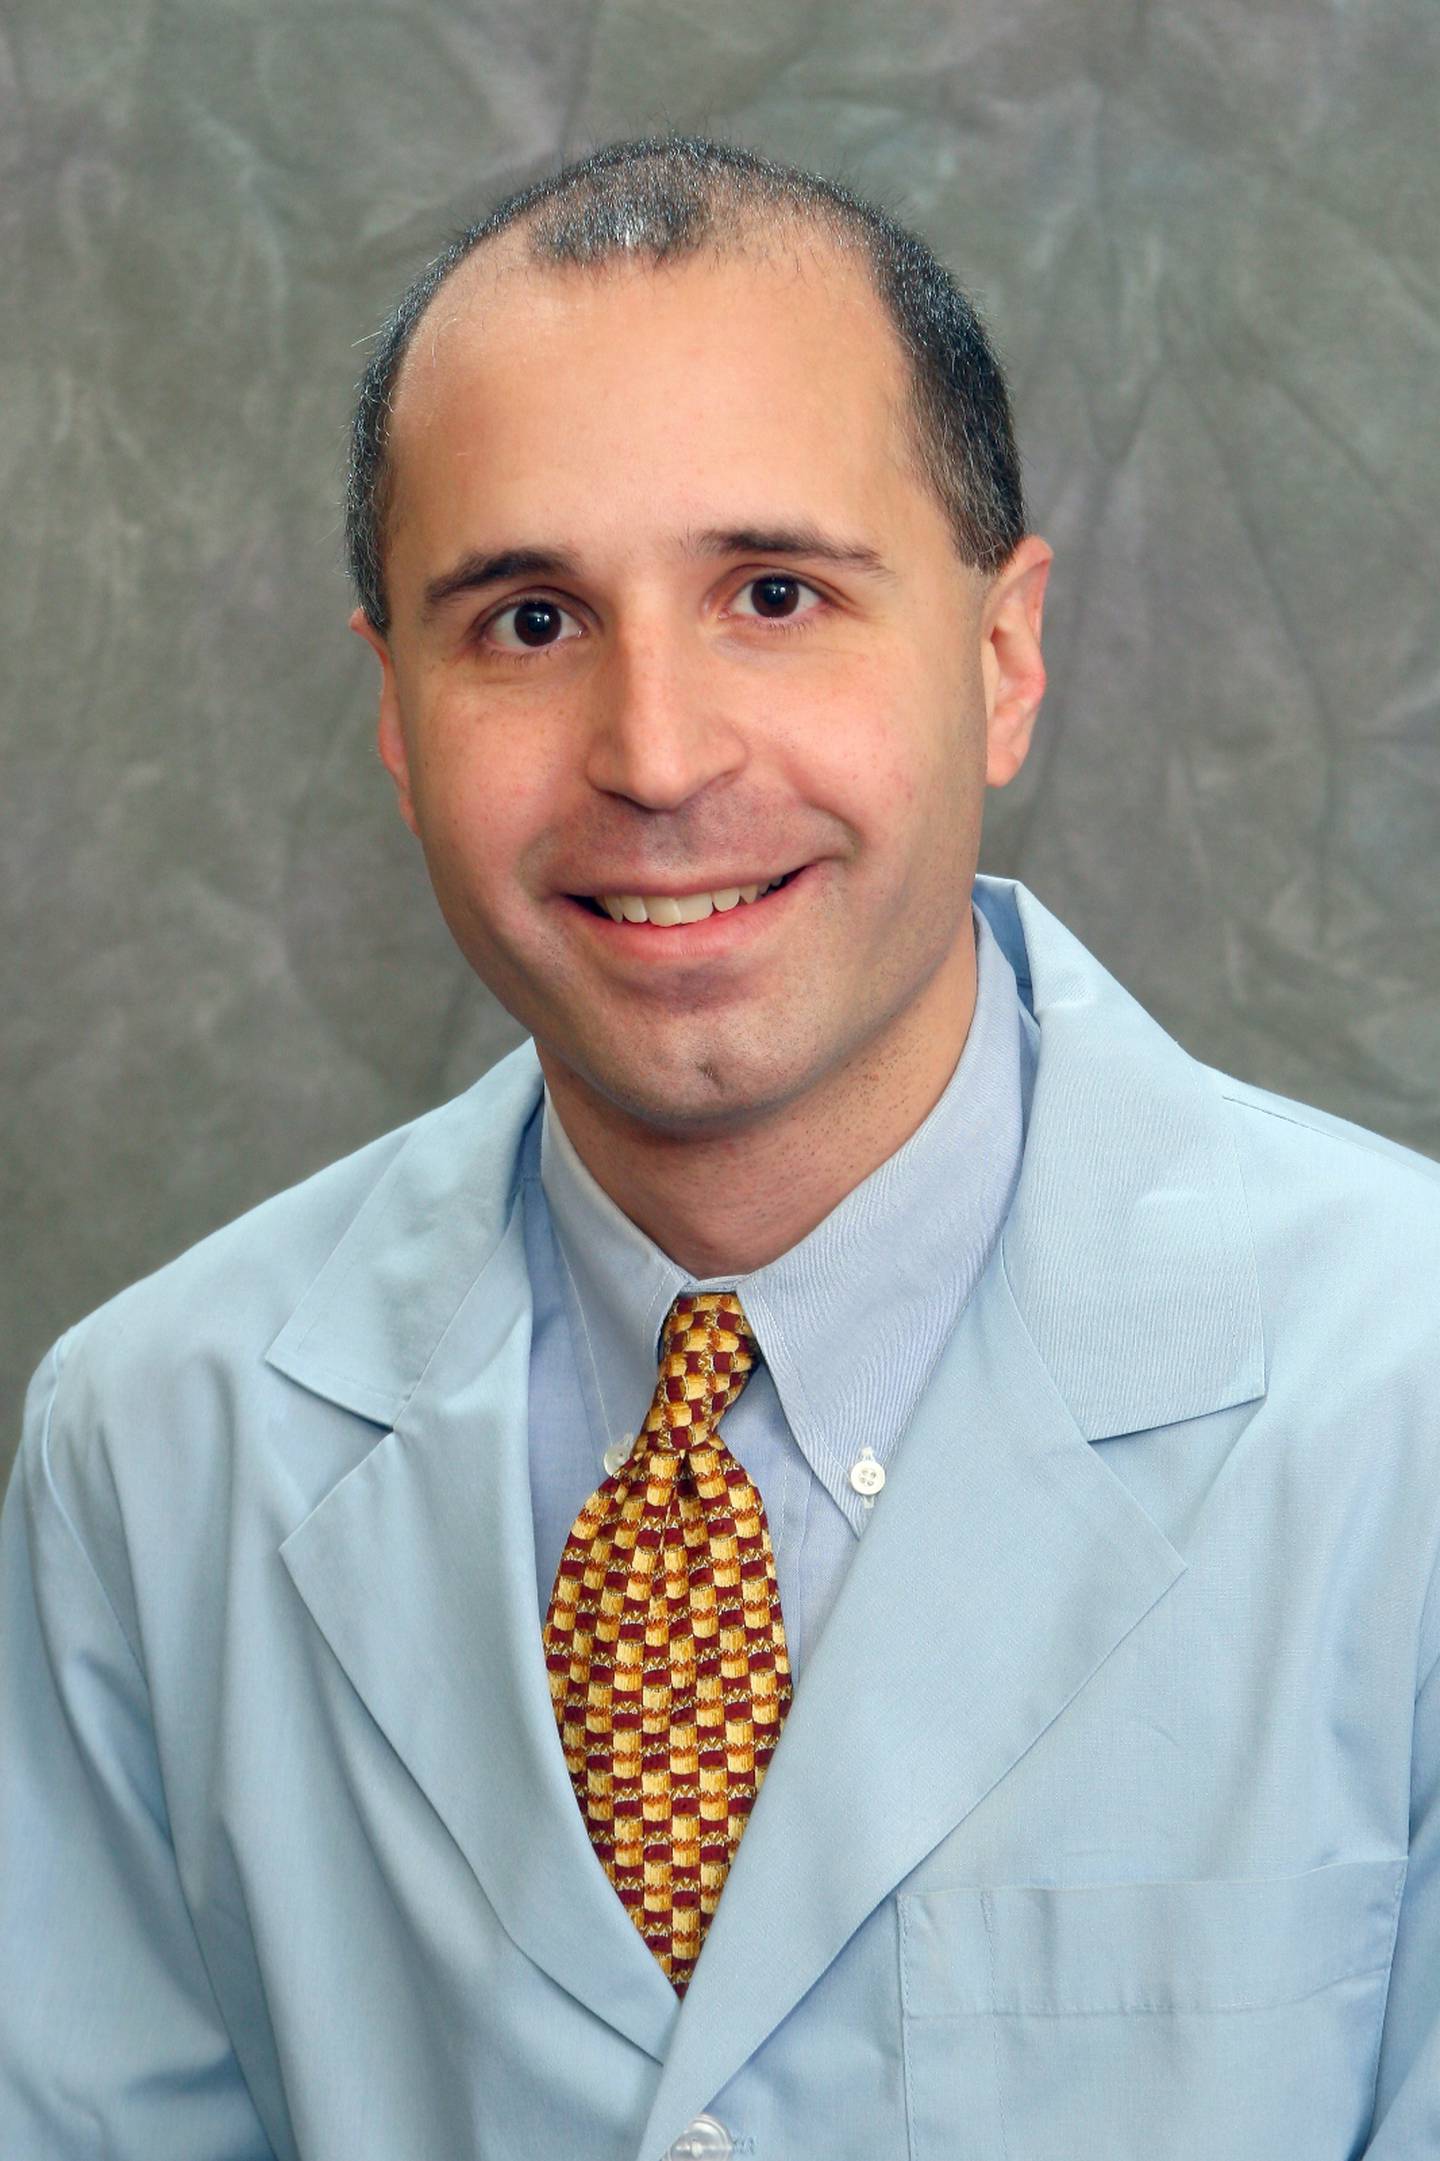 Dr. Paul Aschinberg is a pediatrician in Joliet and sees patients at Silver Cross Hospital in New Lenox.